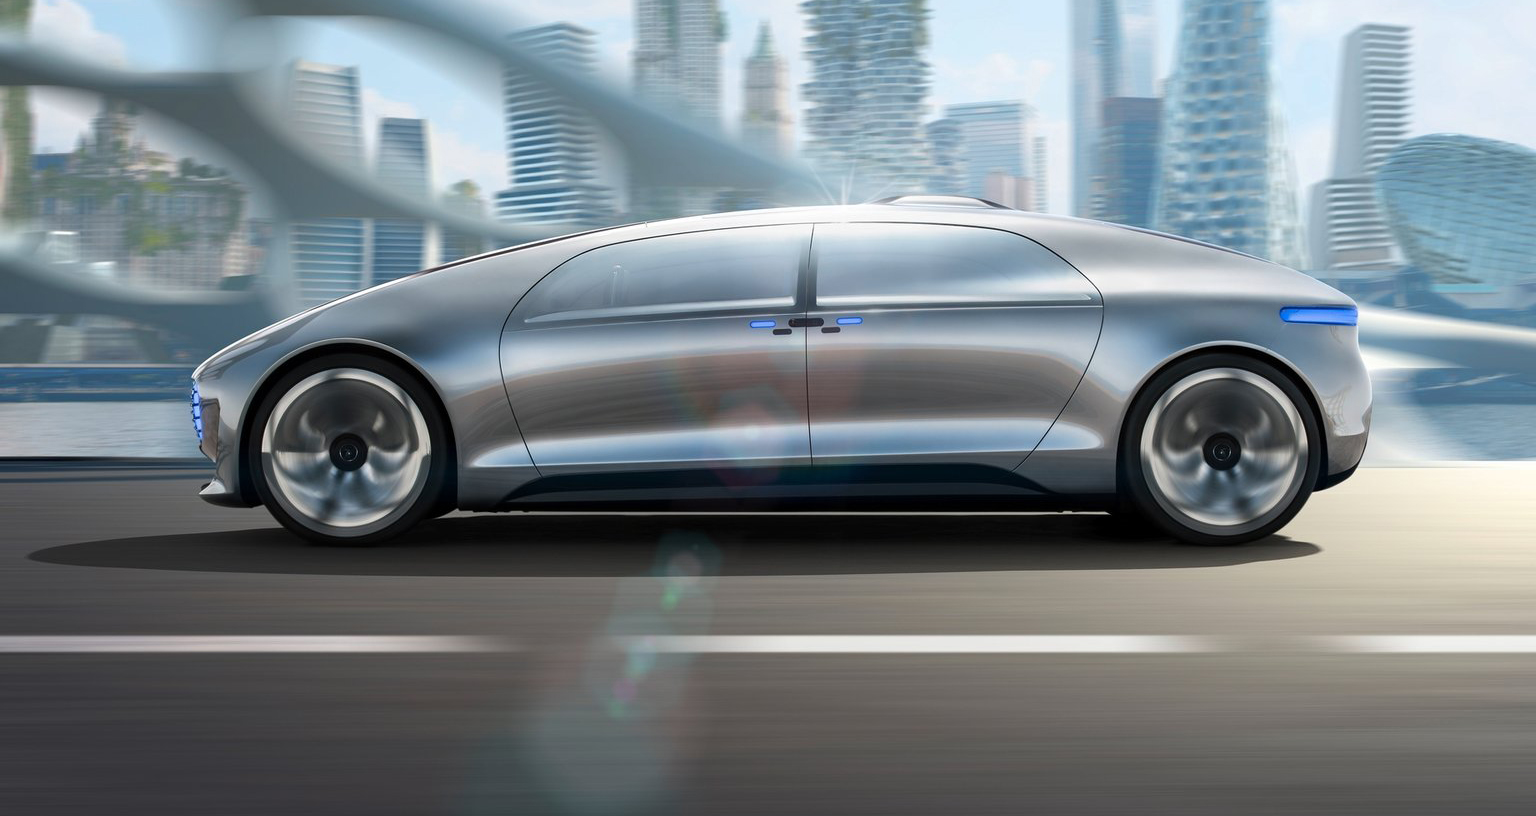 Mercedes-Benz F 015 side view